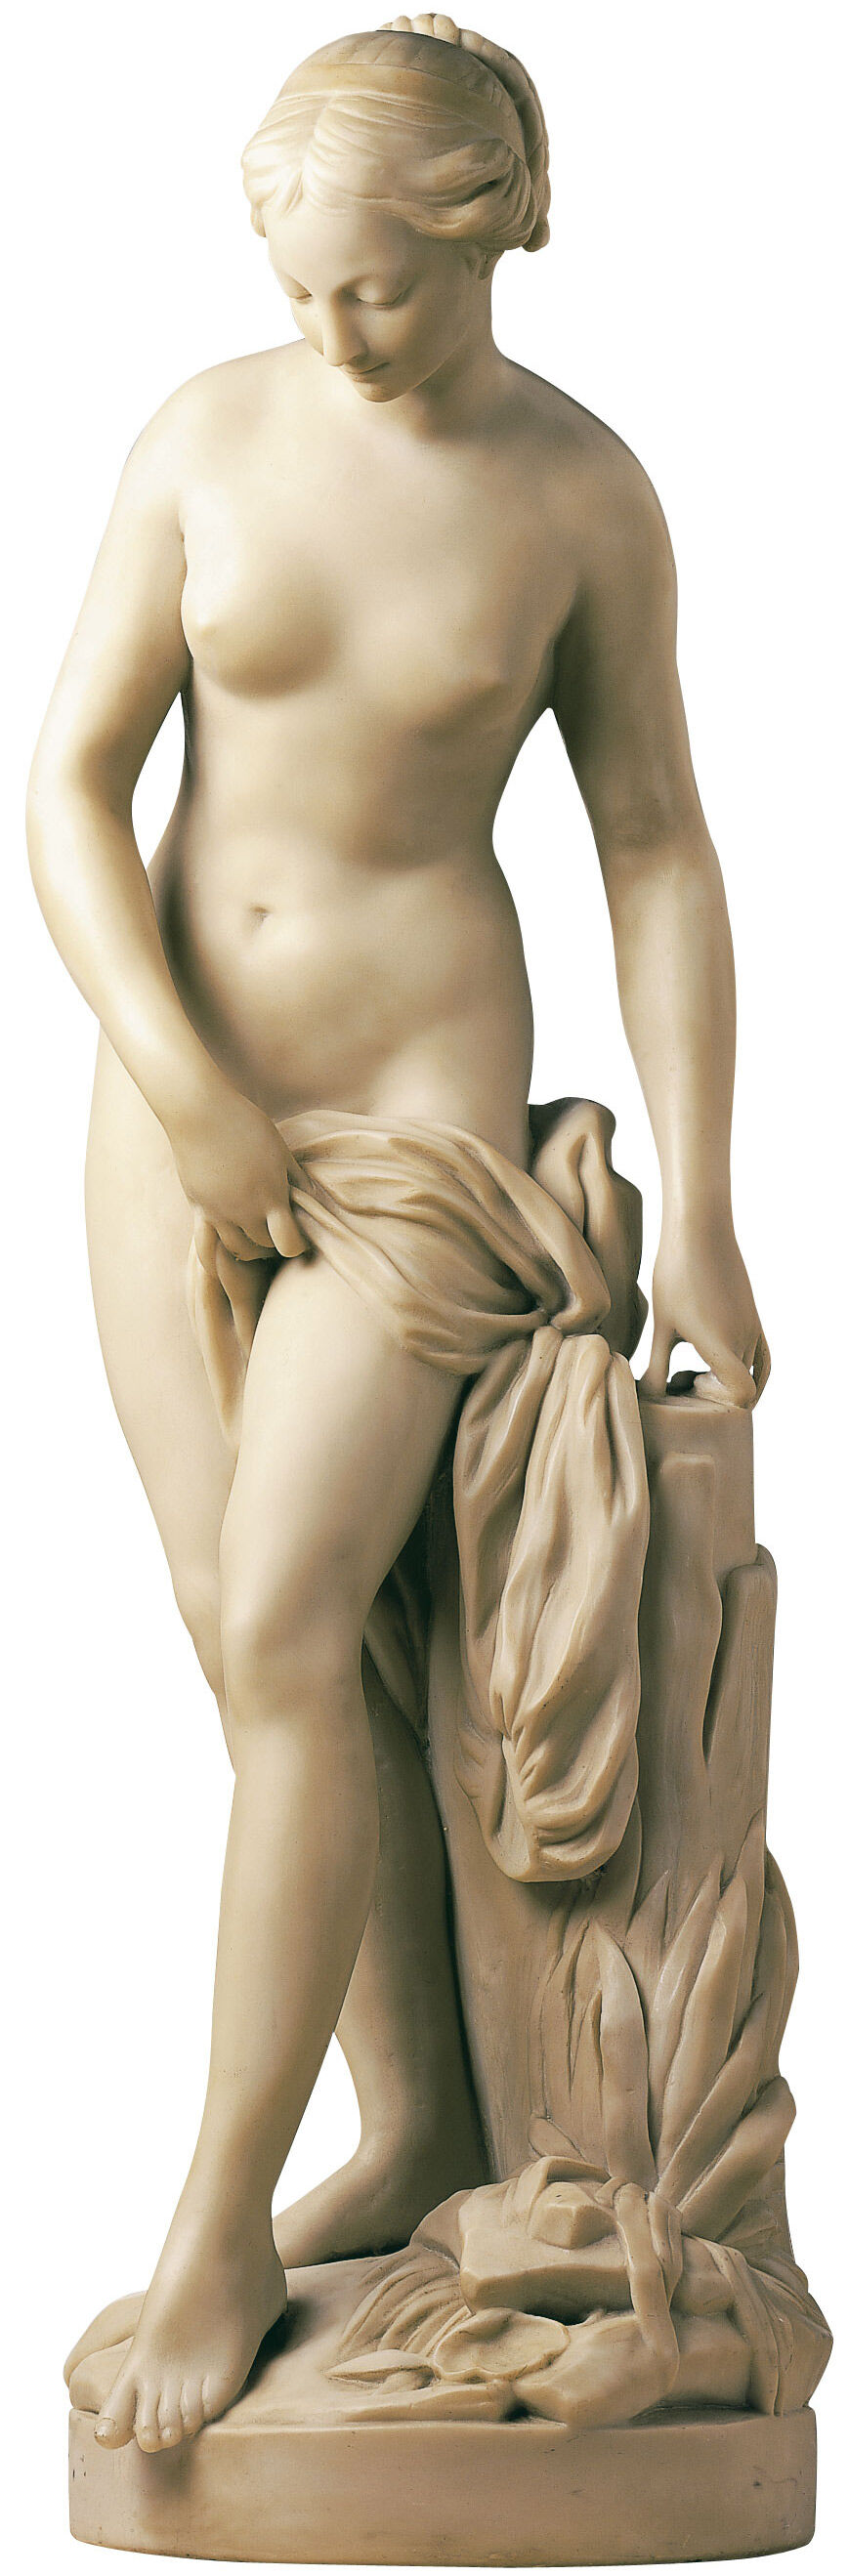 Sculpture "Bather" (Reduction), artificial marble by Etienne-Maurice Falconet